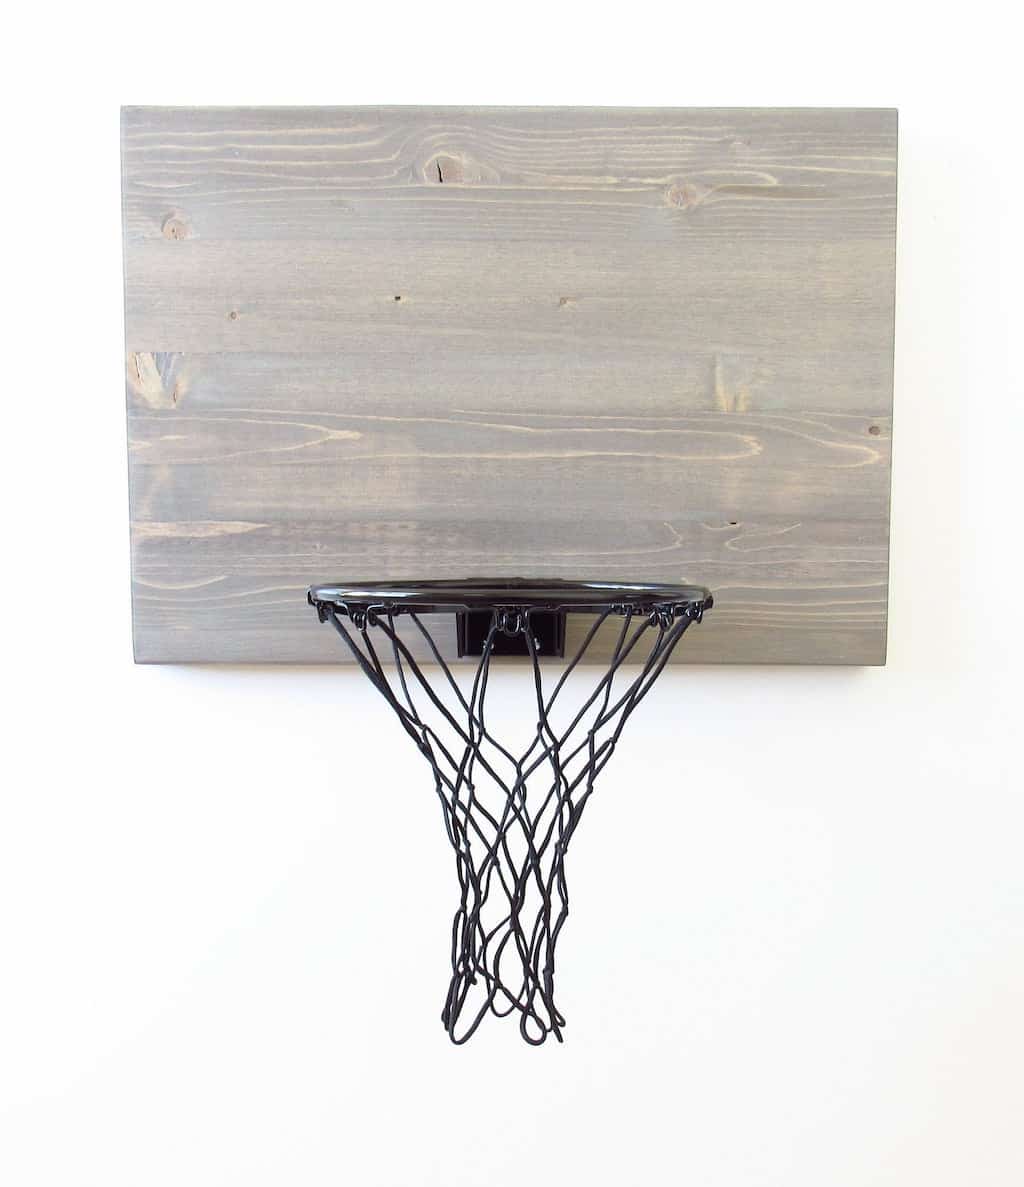 Wood Basketball Hoop For Man Cave